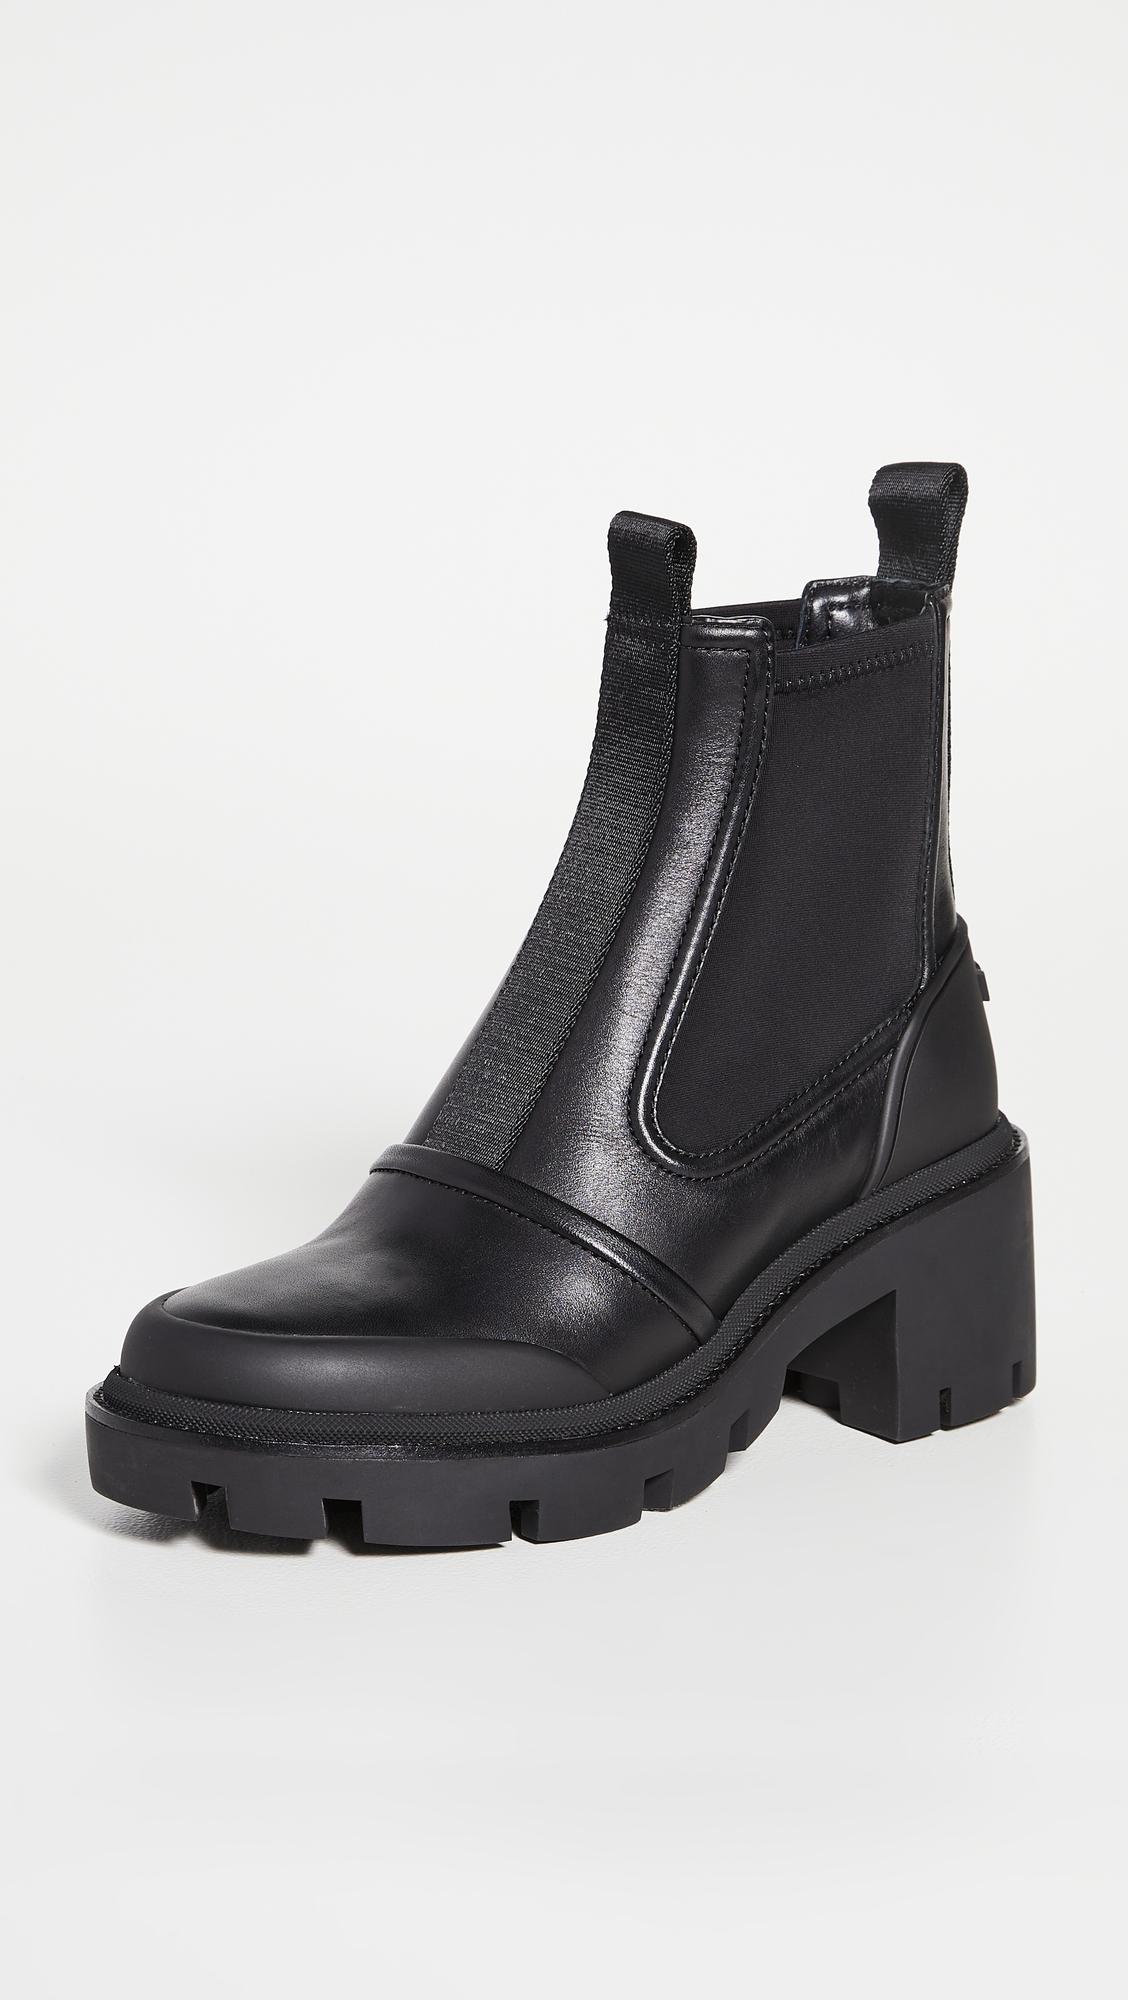 Tory Burch Chelsea Lug Sole Ankle Boots in Black | Lyst Canada